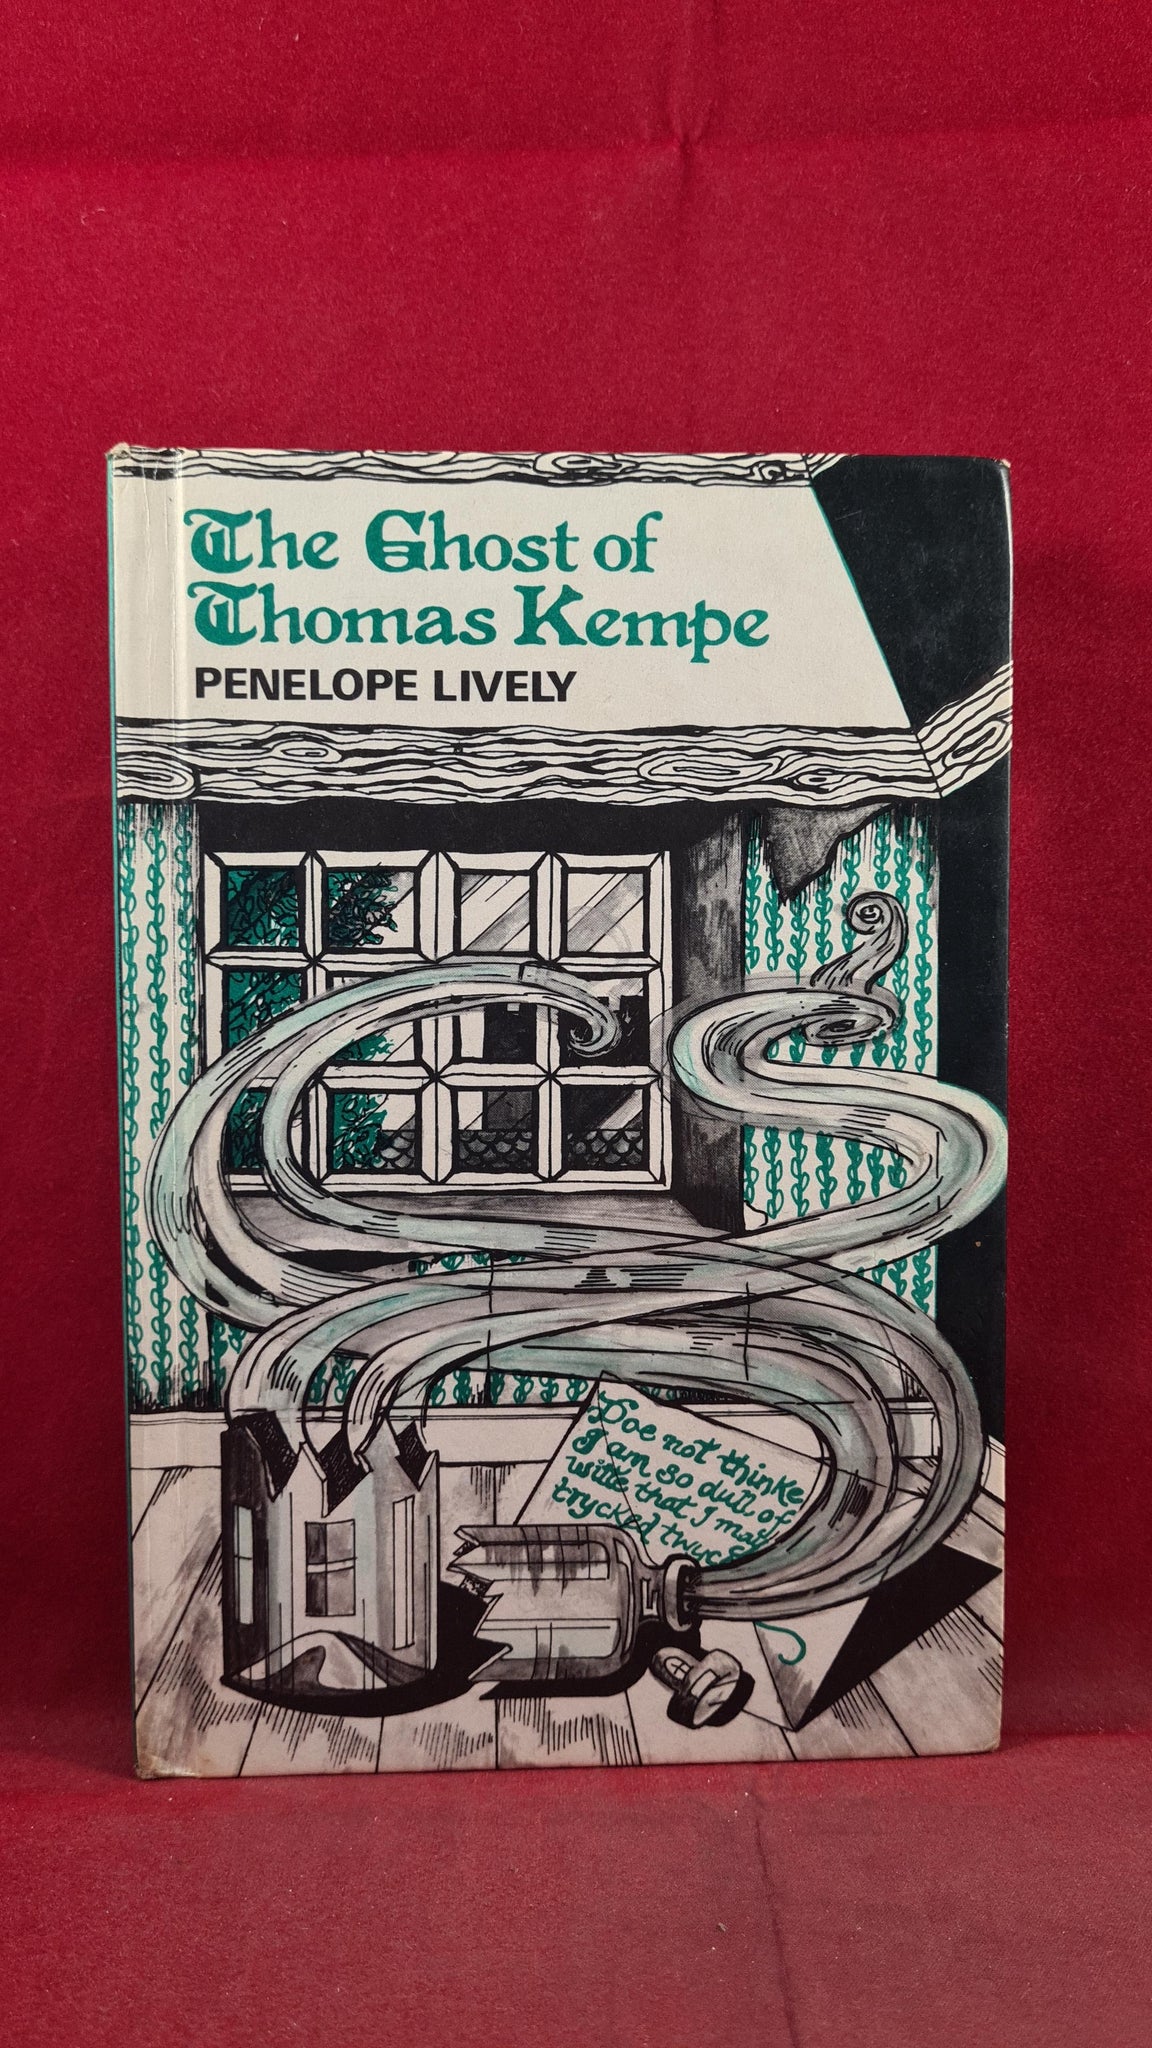 The Ghost of Thomas Kempe by Penelope Lively